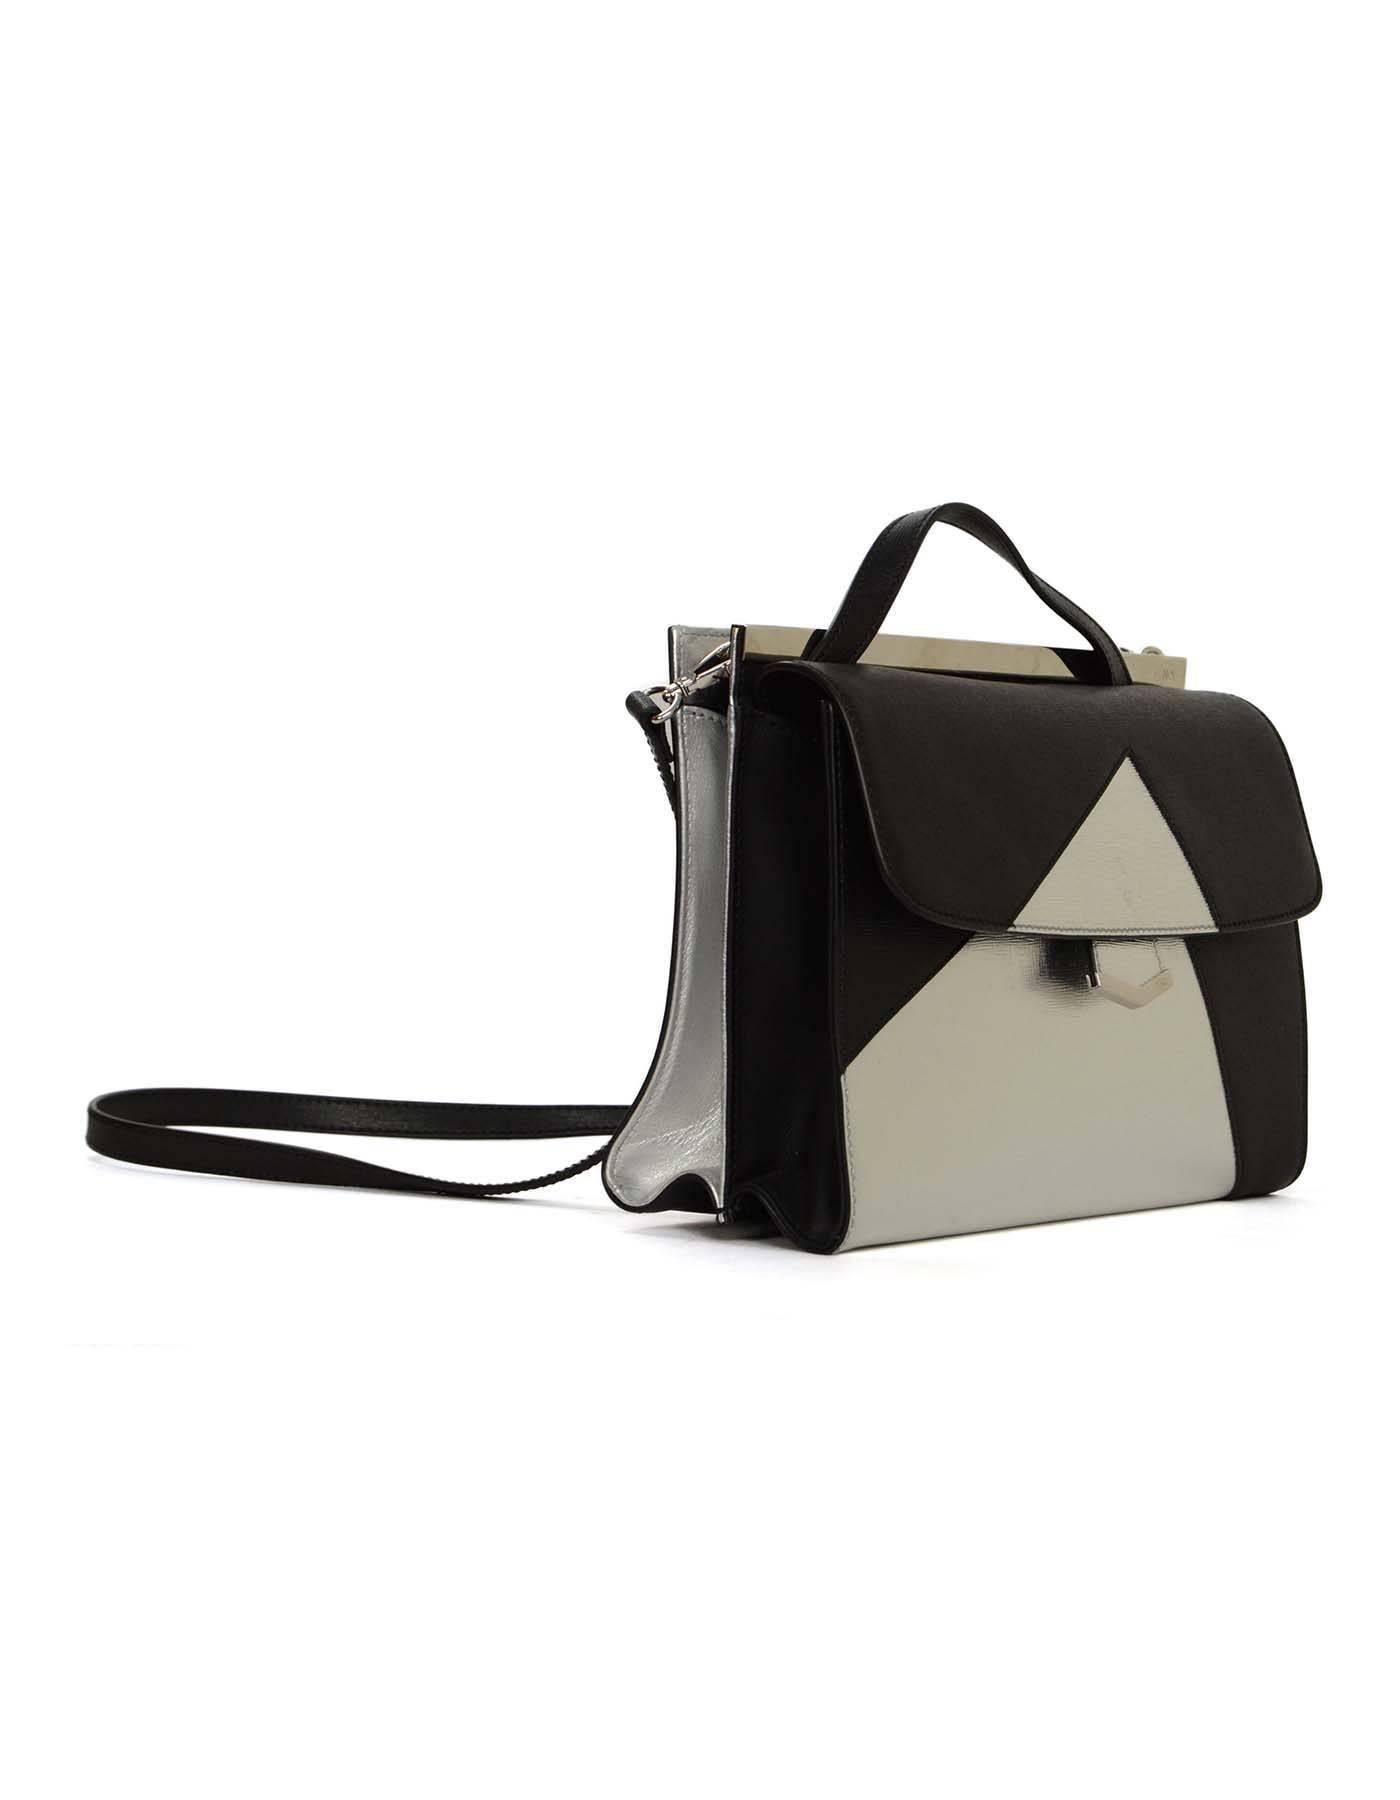 Fendi Black & Silver Textured Leather 'Demijours' Bag 
Features optional shoulder/crossbody strap
Made In: Italy
Color: Black and silver
Hardware: Silvertone
Materials: Textured leather
Lining: Black canvas
Closure/Opening: Dual opening with